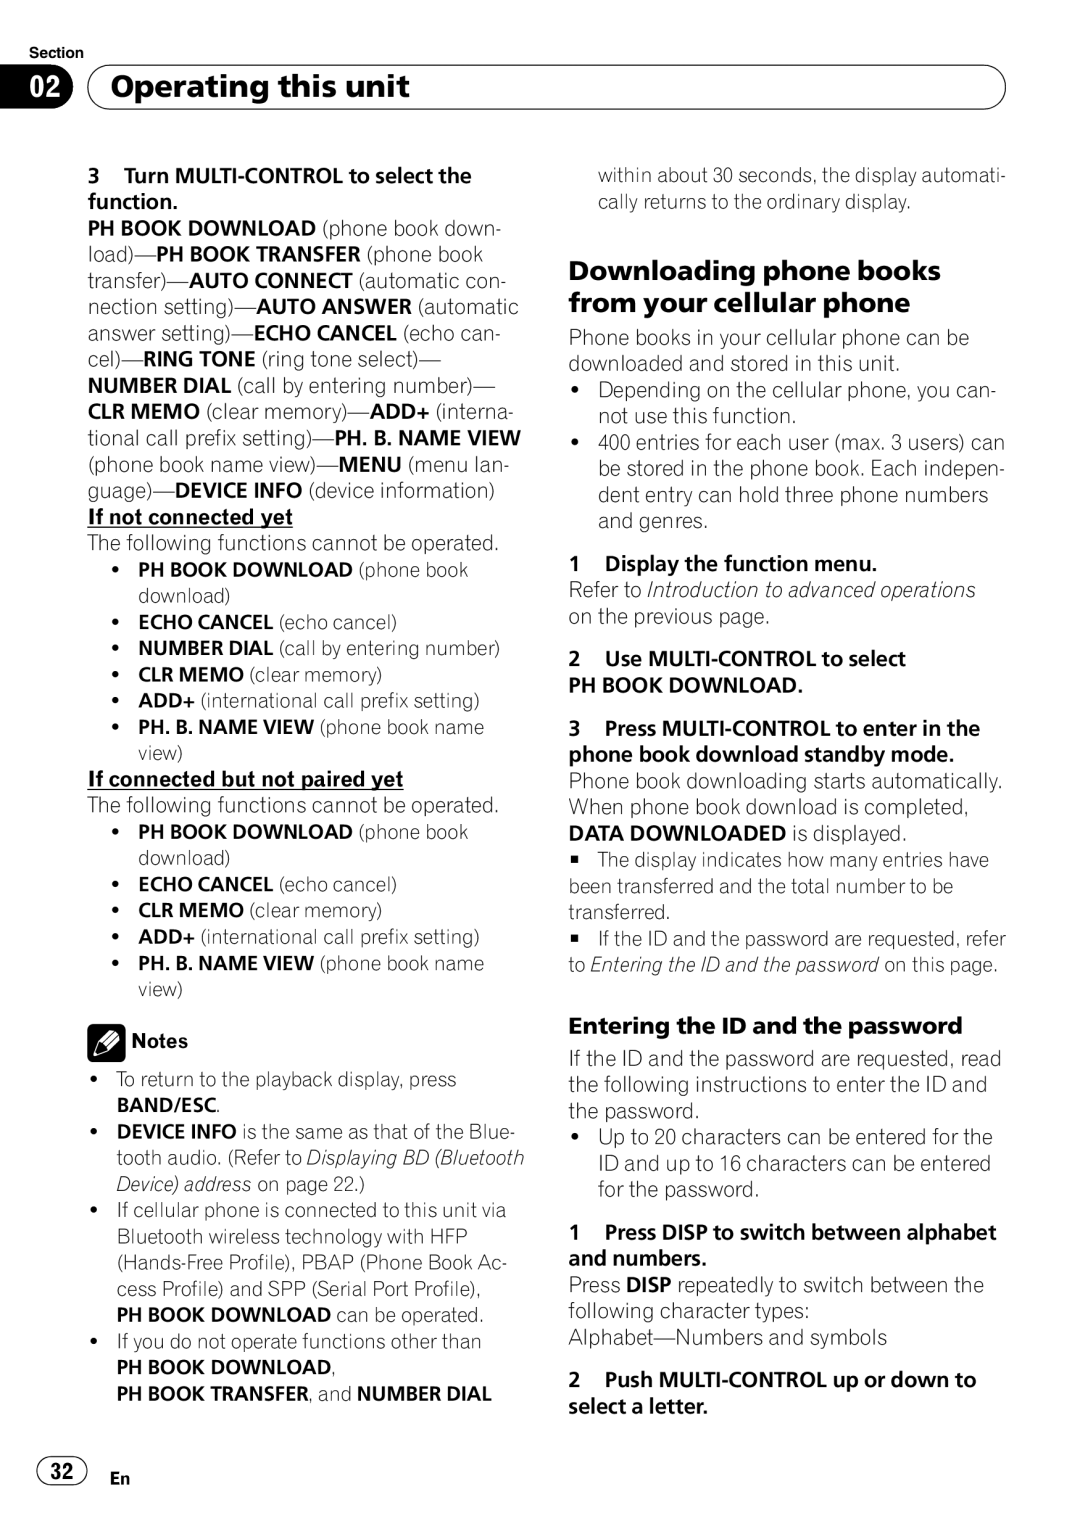 Pioneer DEH-600BT operation manual Downloading phone books from your cellular phone, Entering the ID and the password 